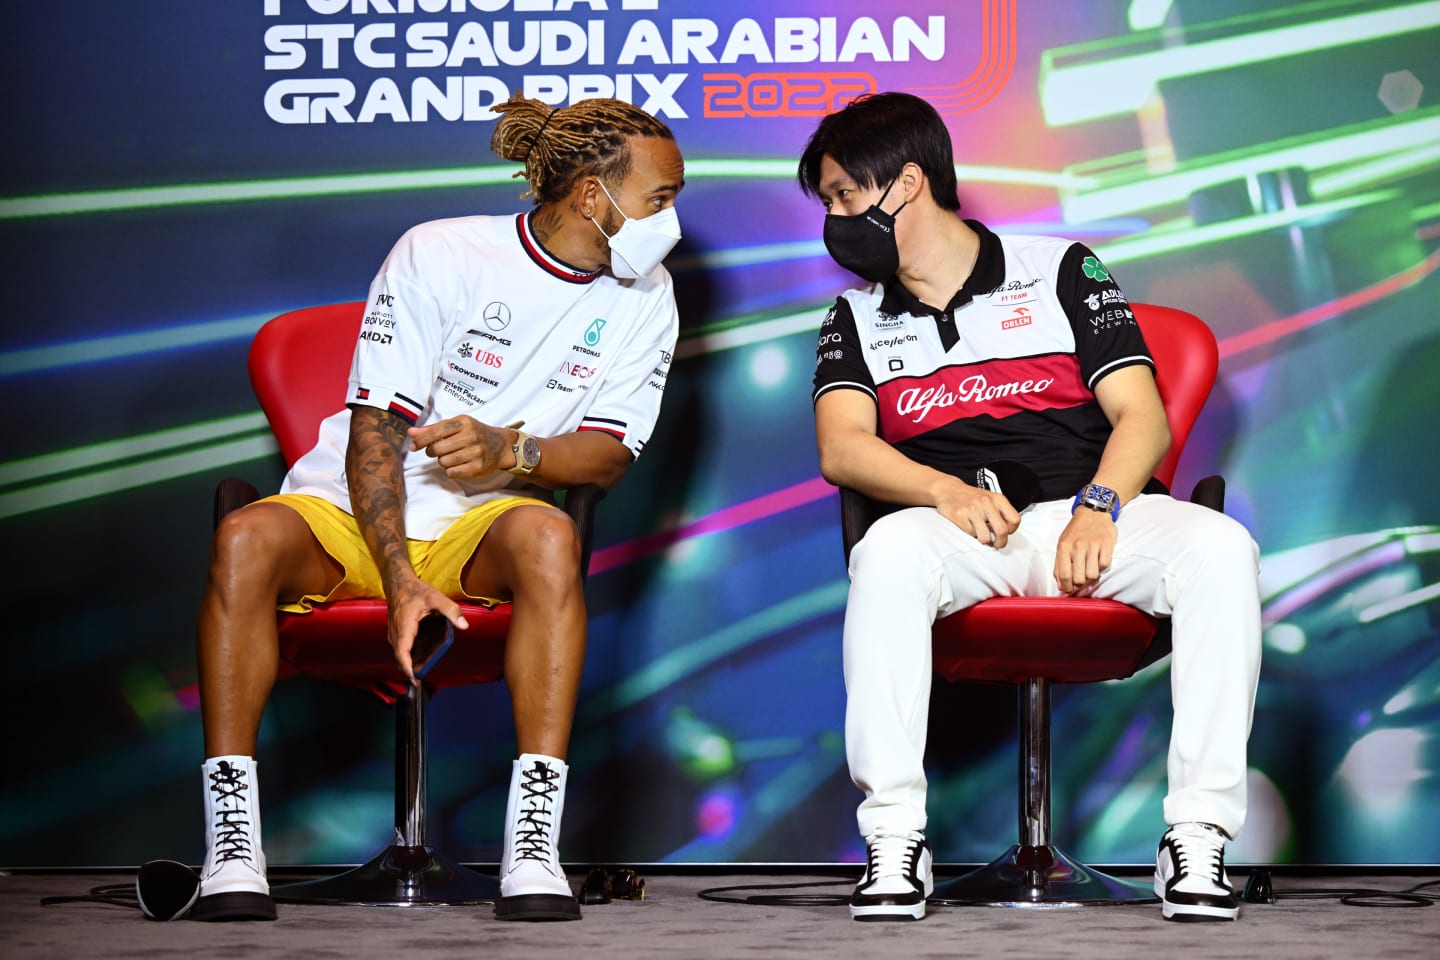 JEDDAH, SAUDI ARABIA - MARCH 25: Lewis Hamilton of Great Britain and Mercedes and Zhou Guanyu of China and Alfa Romeo F1 talk in the Drivers Press Conference before practice ahead of the F1 Grand Prix of Saudi Arabia at the Jeddah Corniche Circuit on March 25, 2022 in Jeddah, Saudi Arabia. (Photo by Clive Mason/Getty Images)